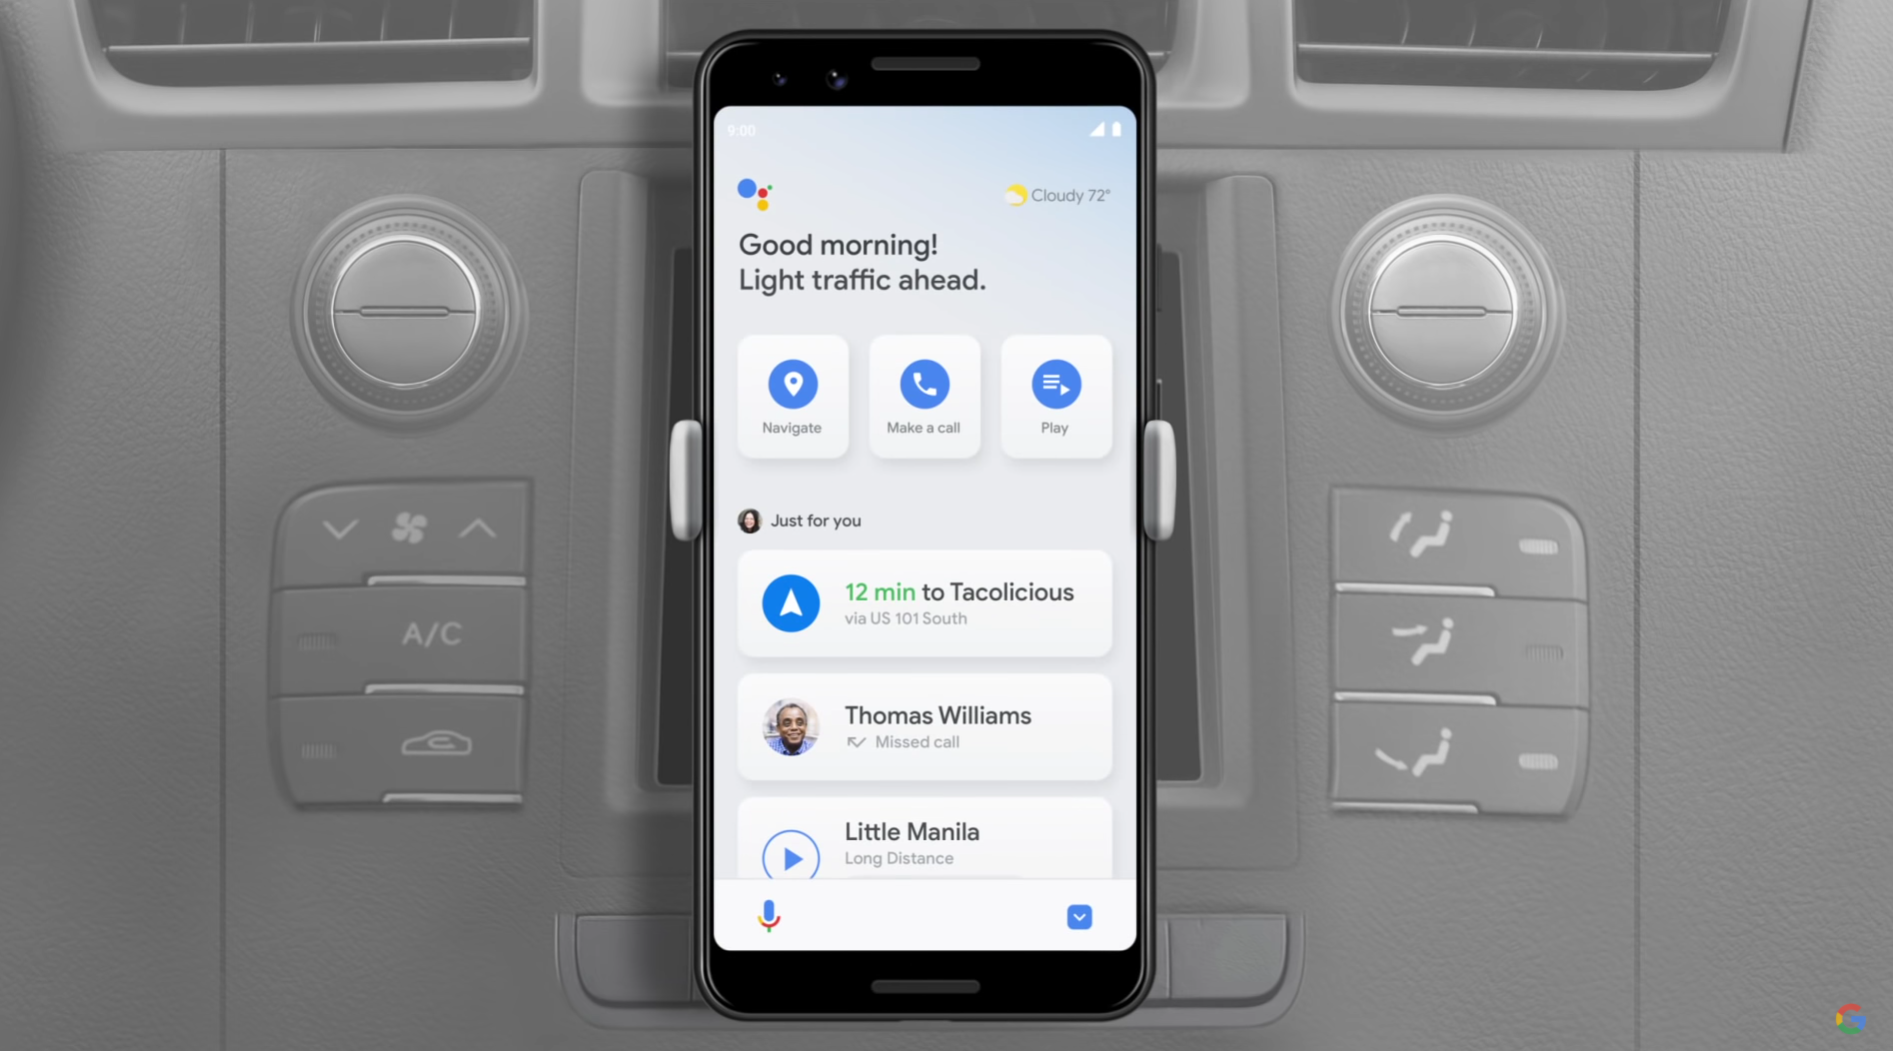 Google is shutting down the Android Auto cell phone app